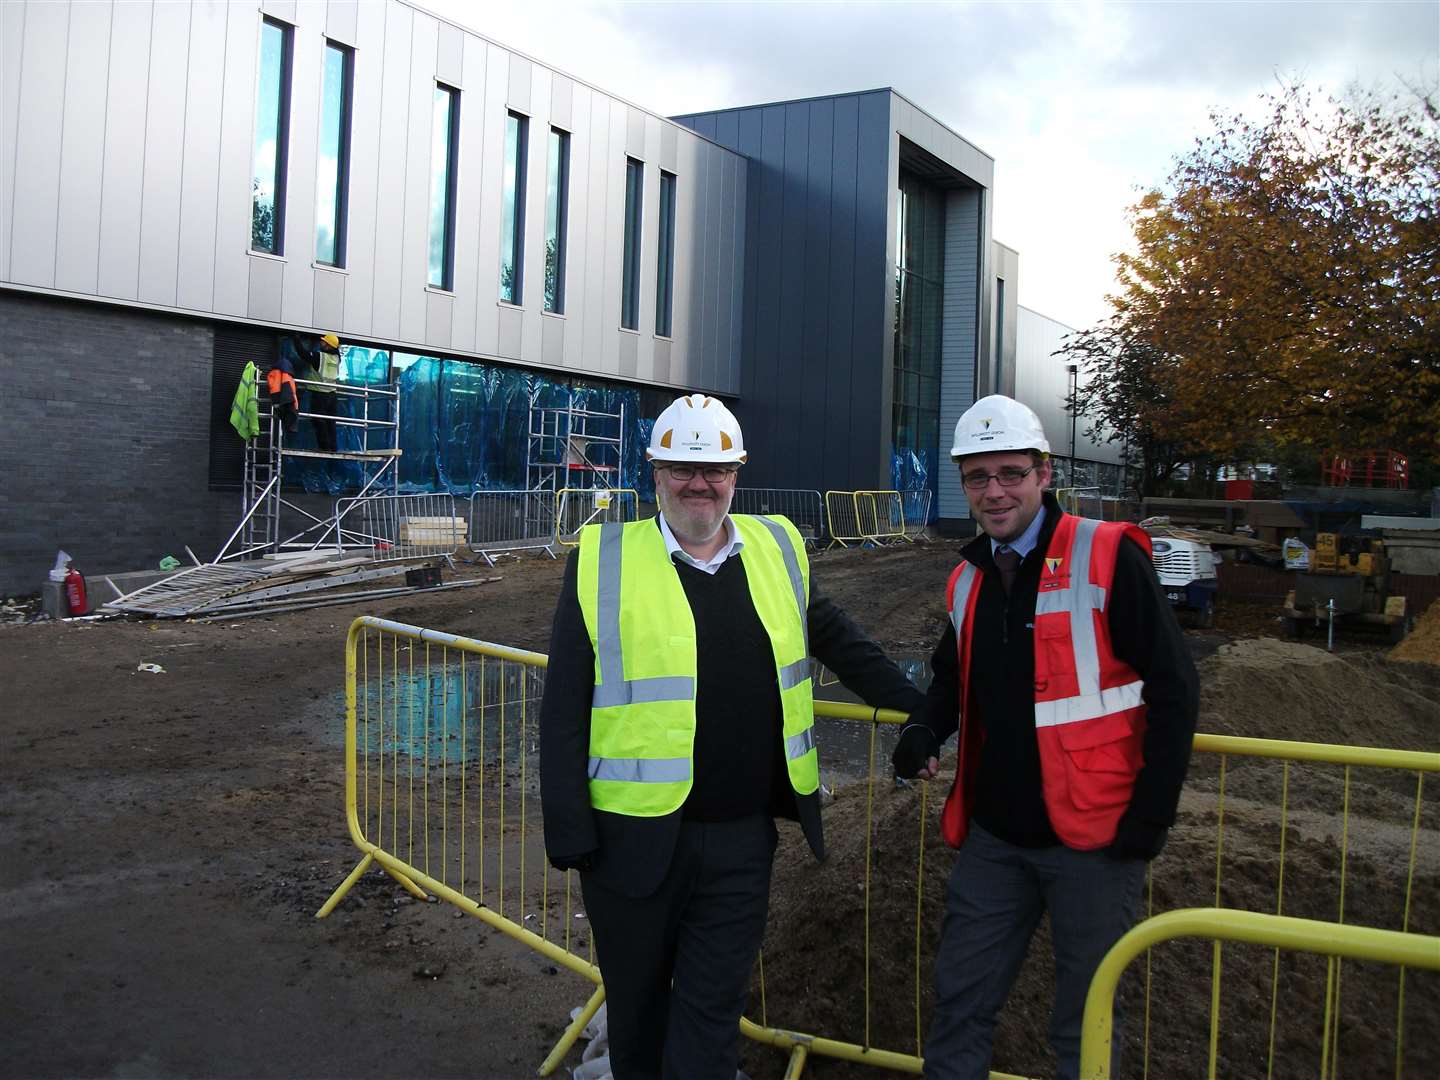 Council leader Jeremy Kite with the project's senior building manager John Charlton.